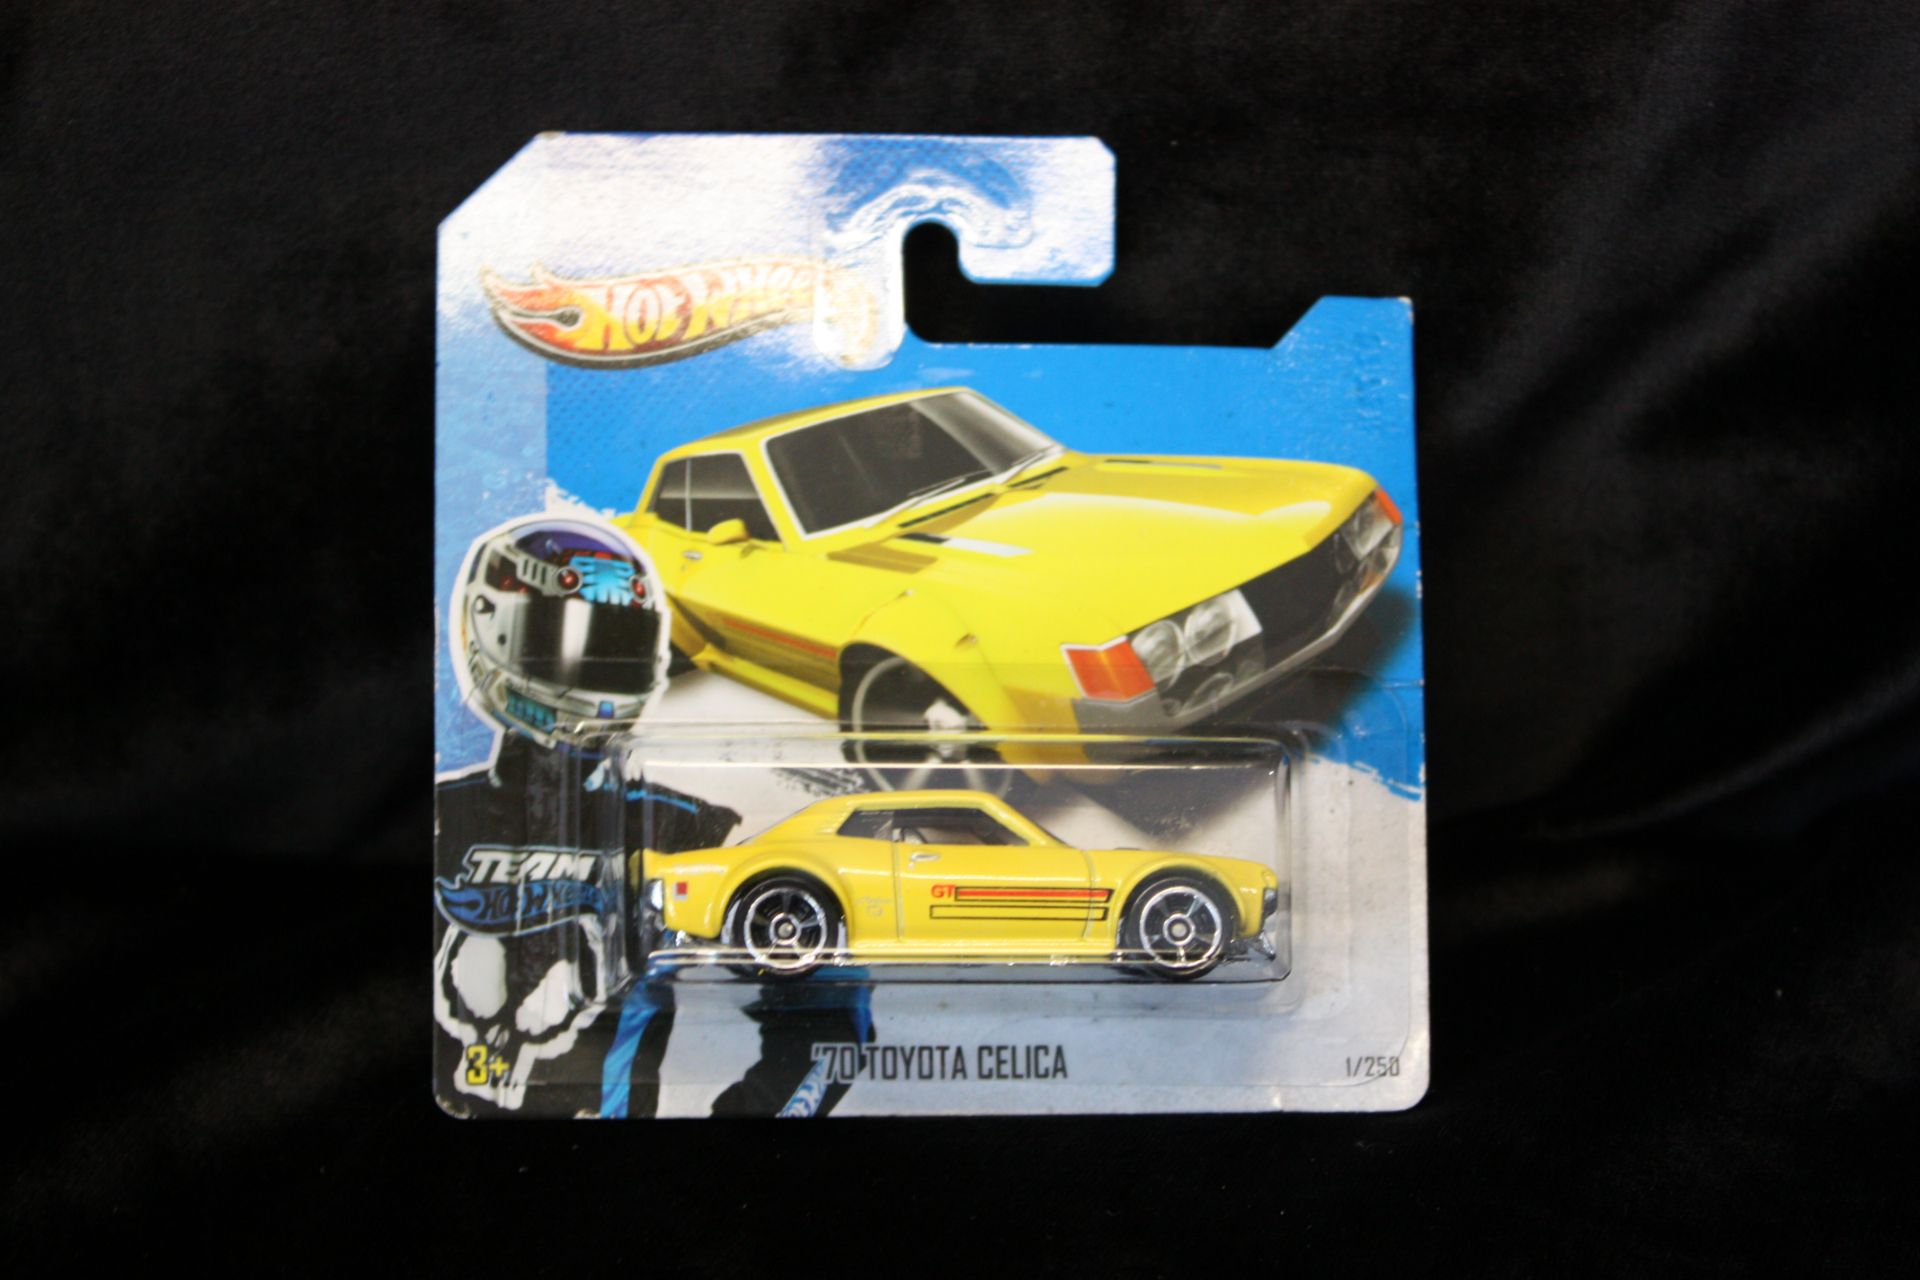 Hot Wheels 1970 Toyota Celica 1/250. Model is part of an old private collection - All items are